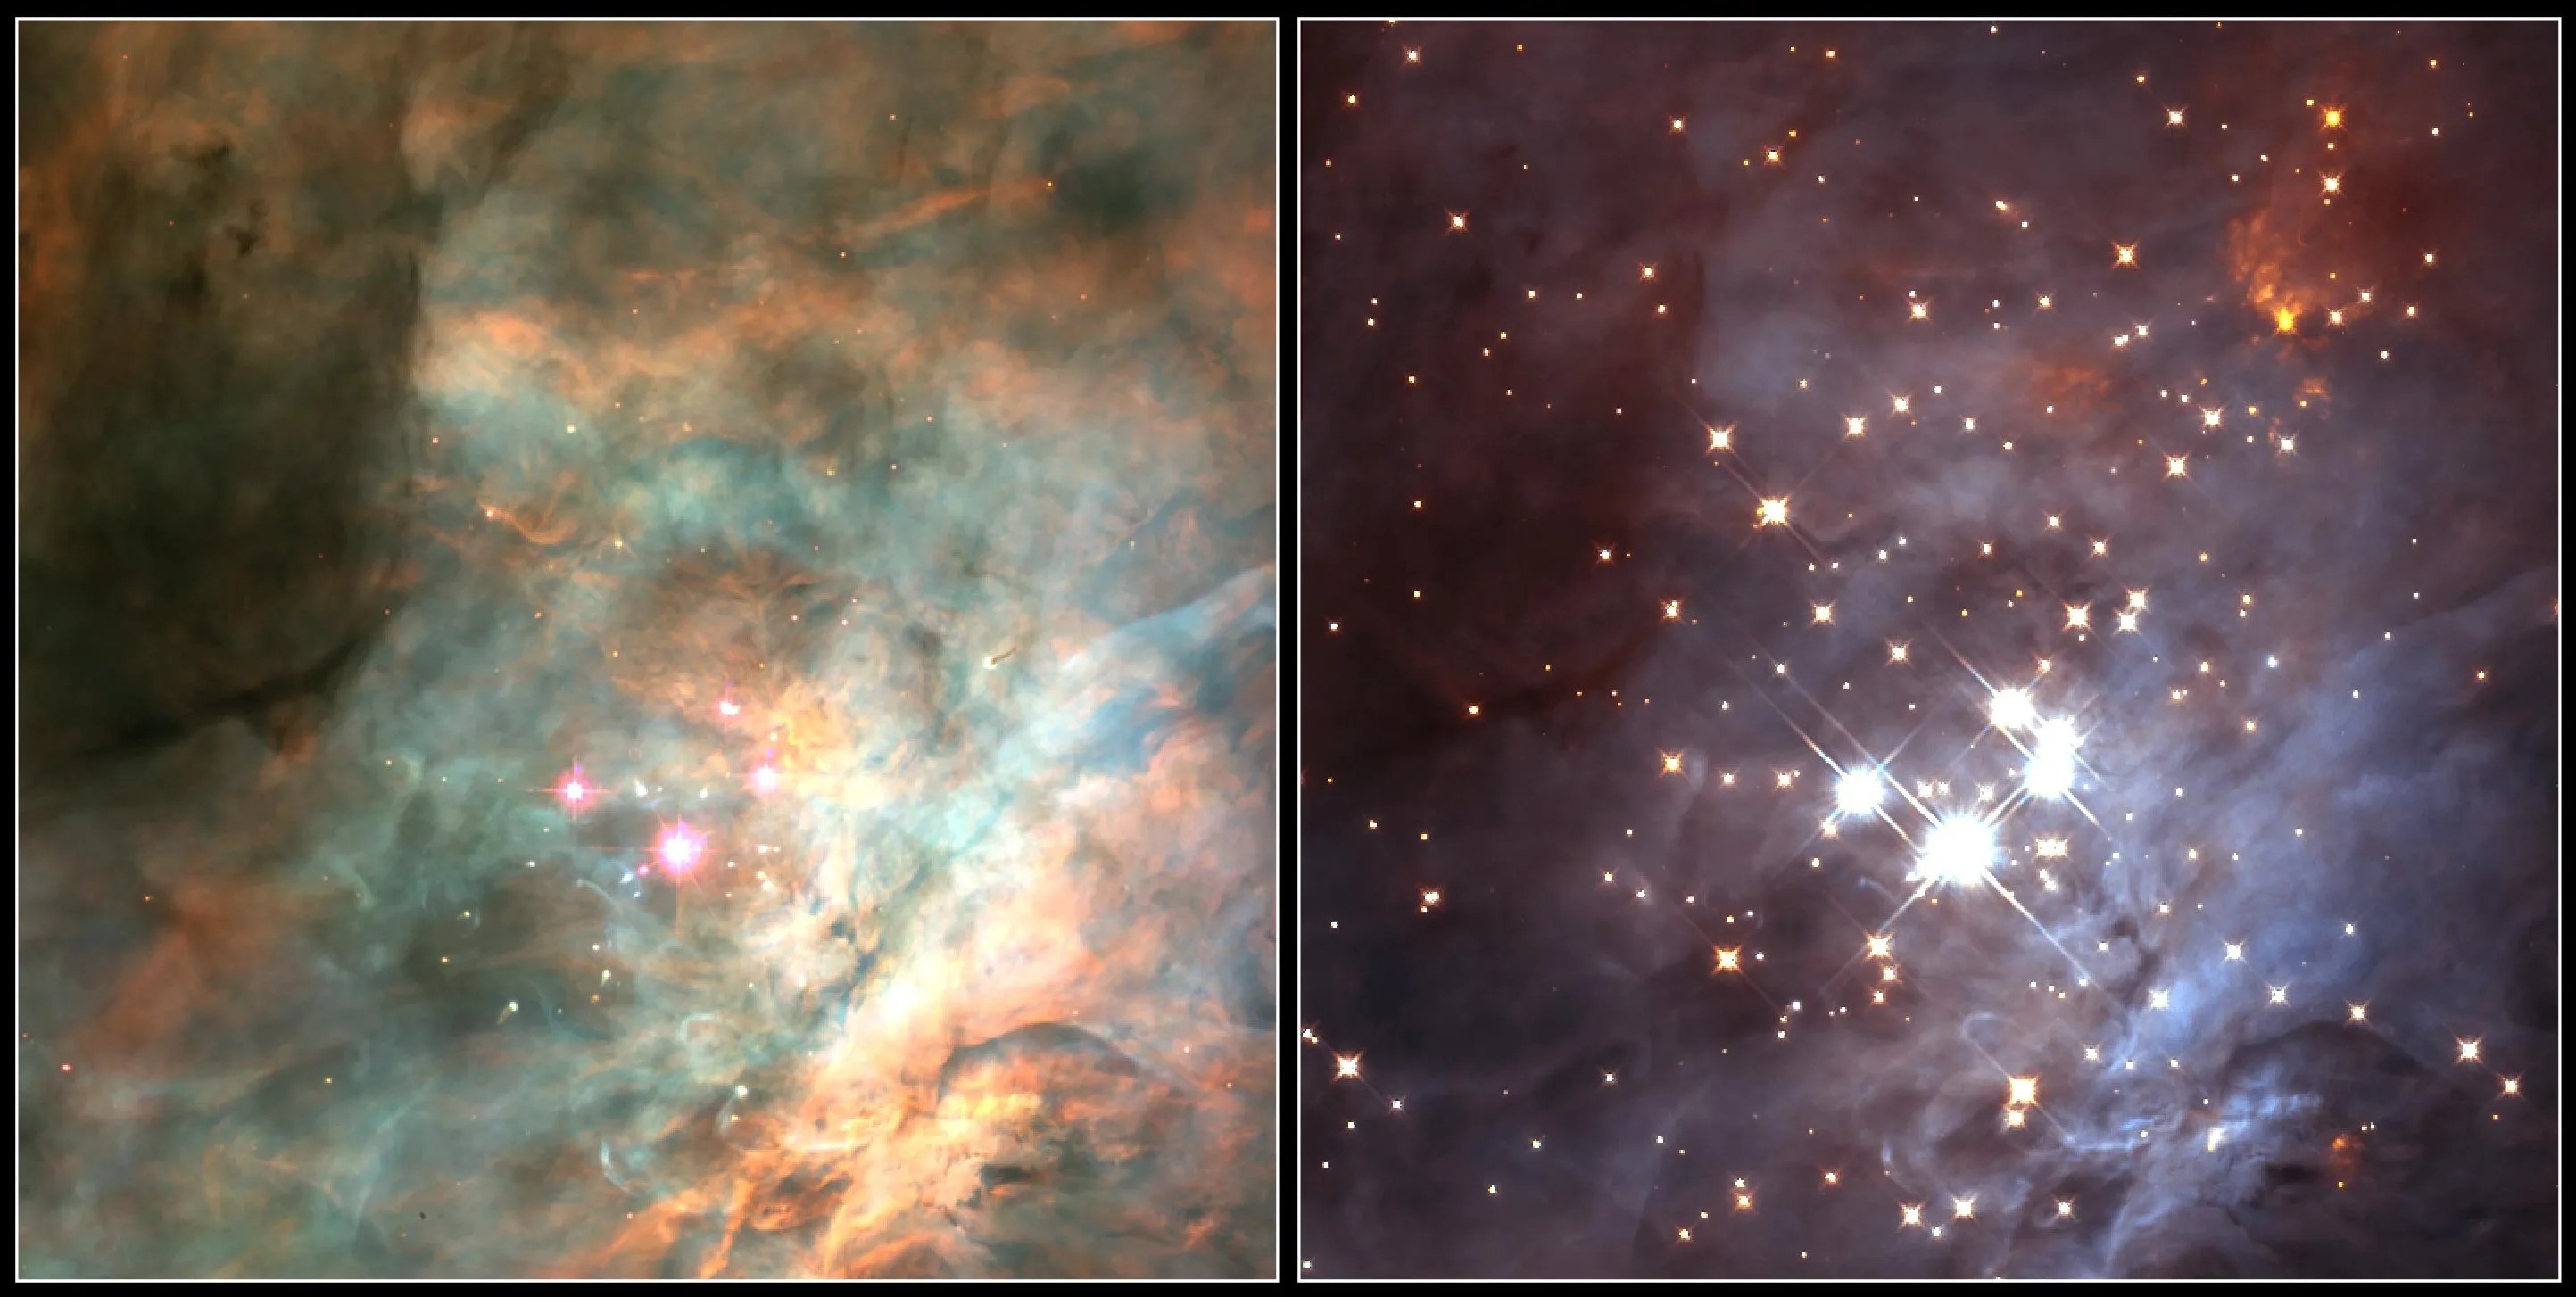 Left: rusty-orange, white, and light green billowing cloud with several bright-white ringed with pink stars at its center. Right: Blue-white cloud with several bright-white stars at its center. Orange-yellow cloud glows top right.